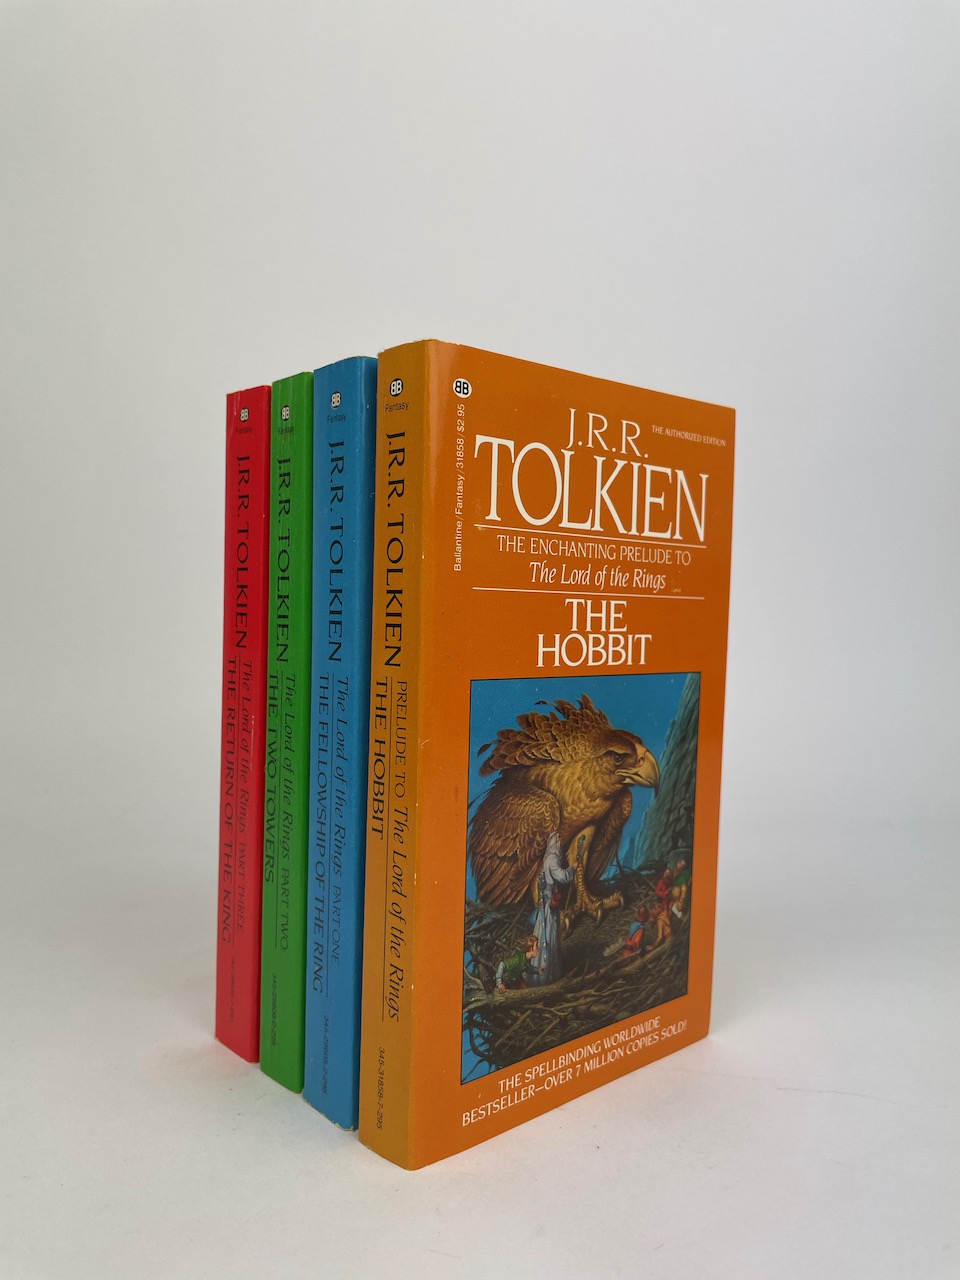 The Lord of the Rings and The Hobbit set from 1984, by Ballantine Books, New York 9